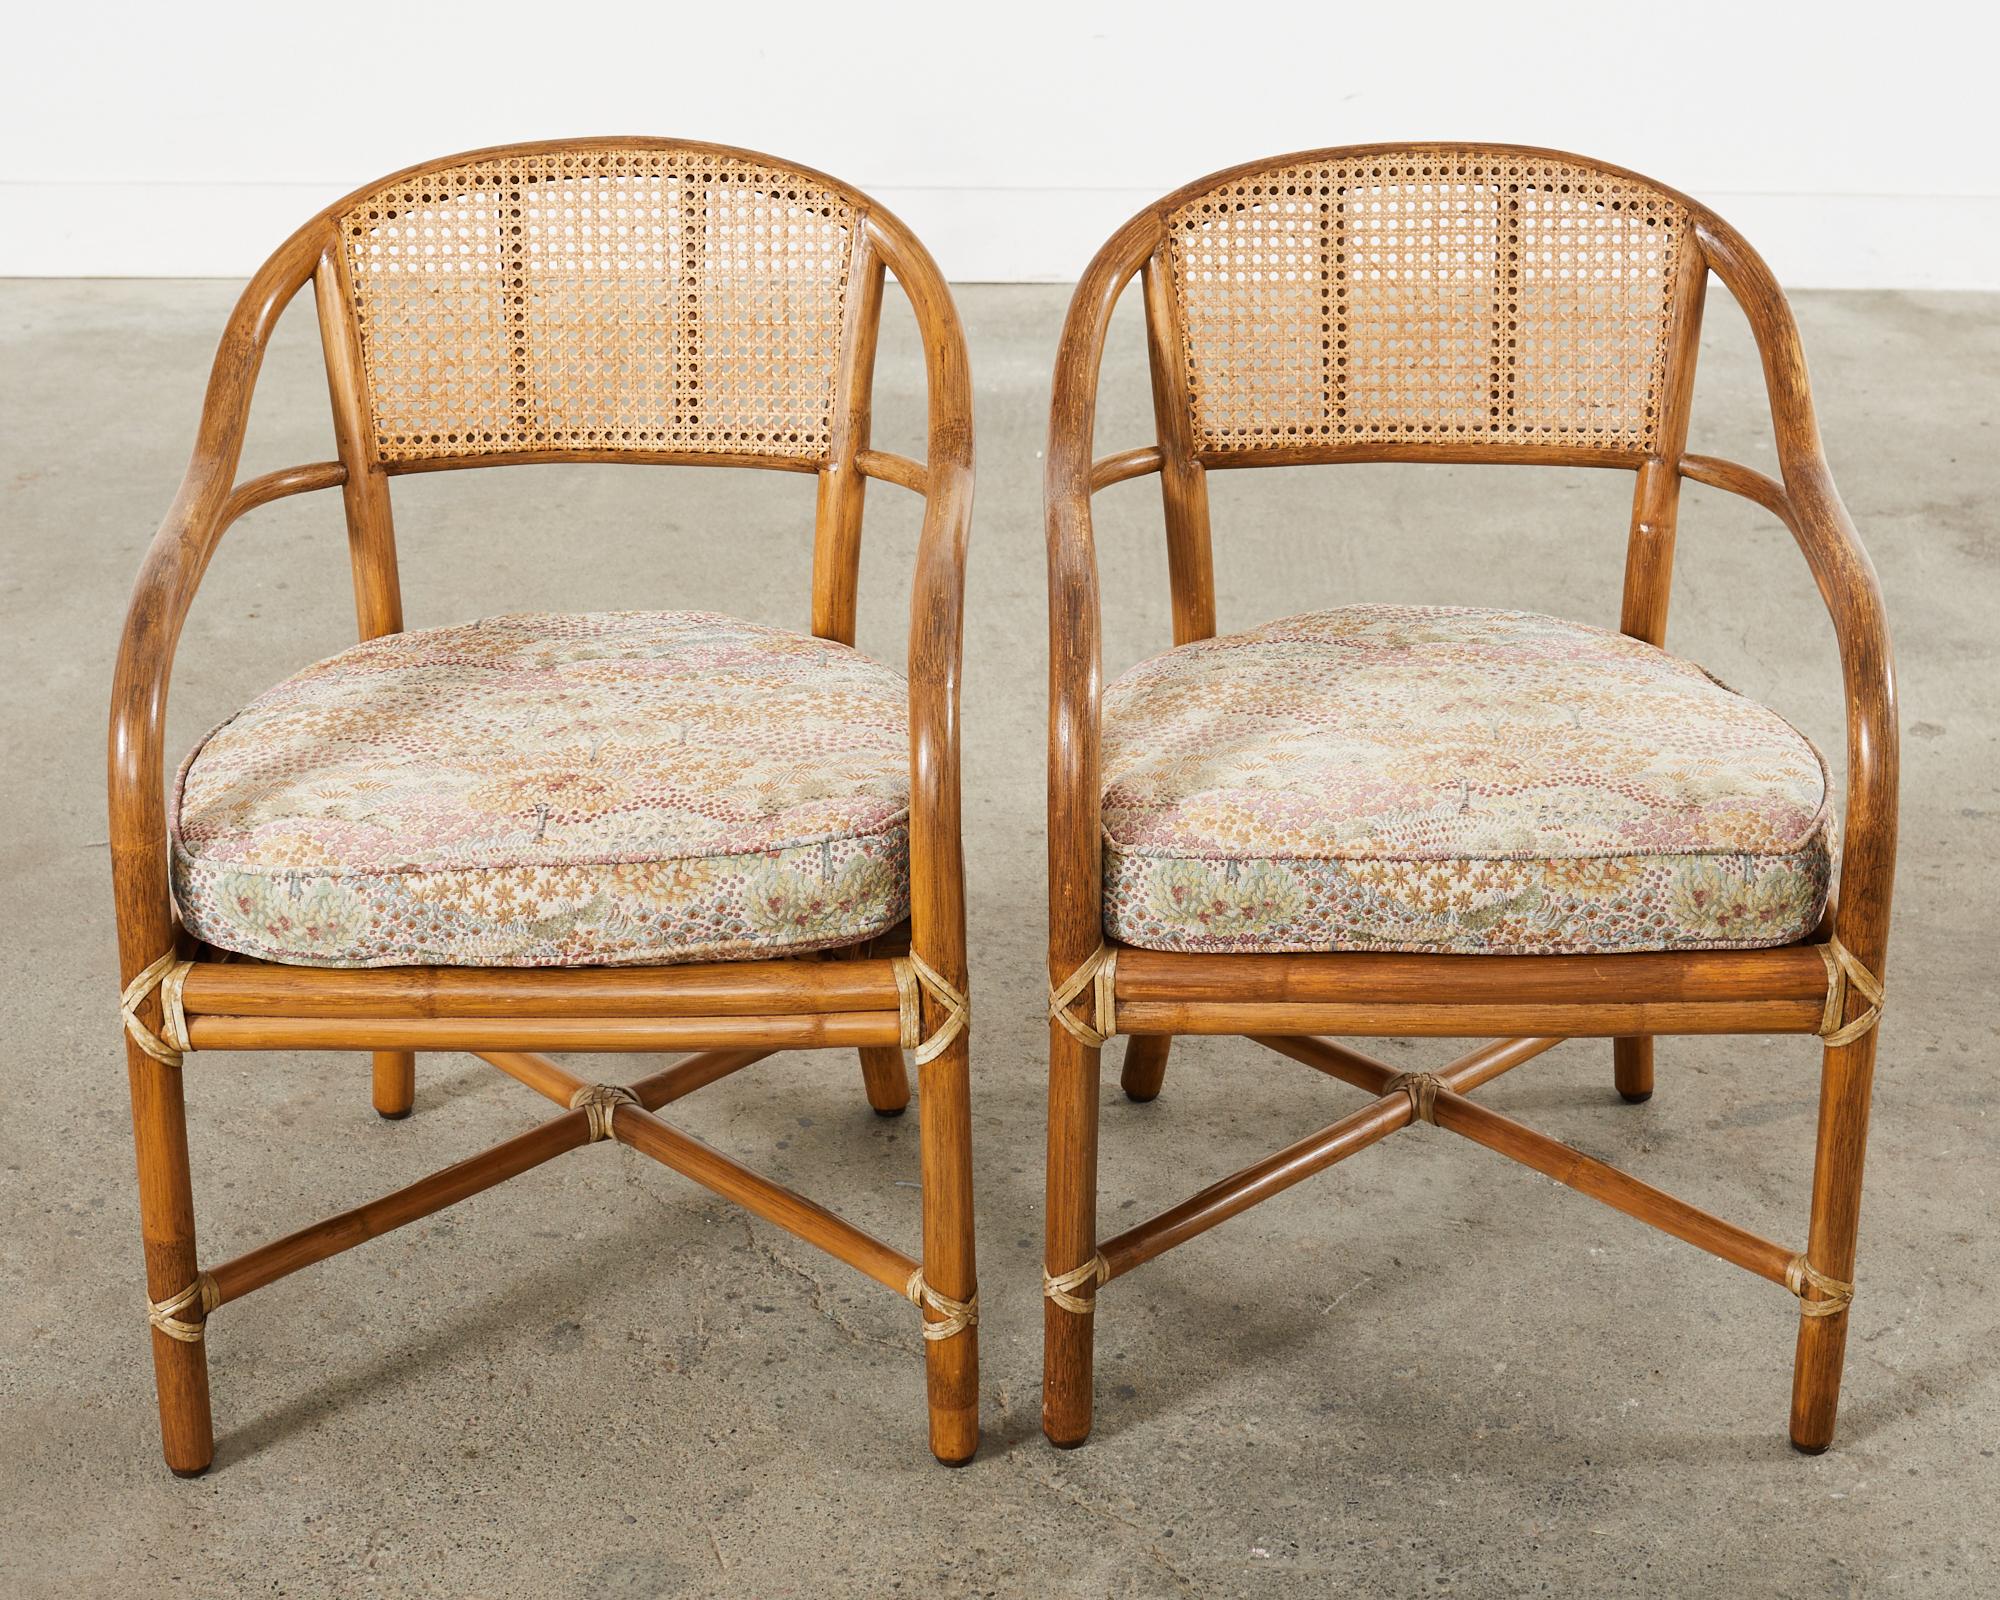 Pair of McGuire Organic Modern Rattan Cane Armchairs In Good Condition For Sale In Rio Vista, CA